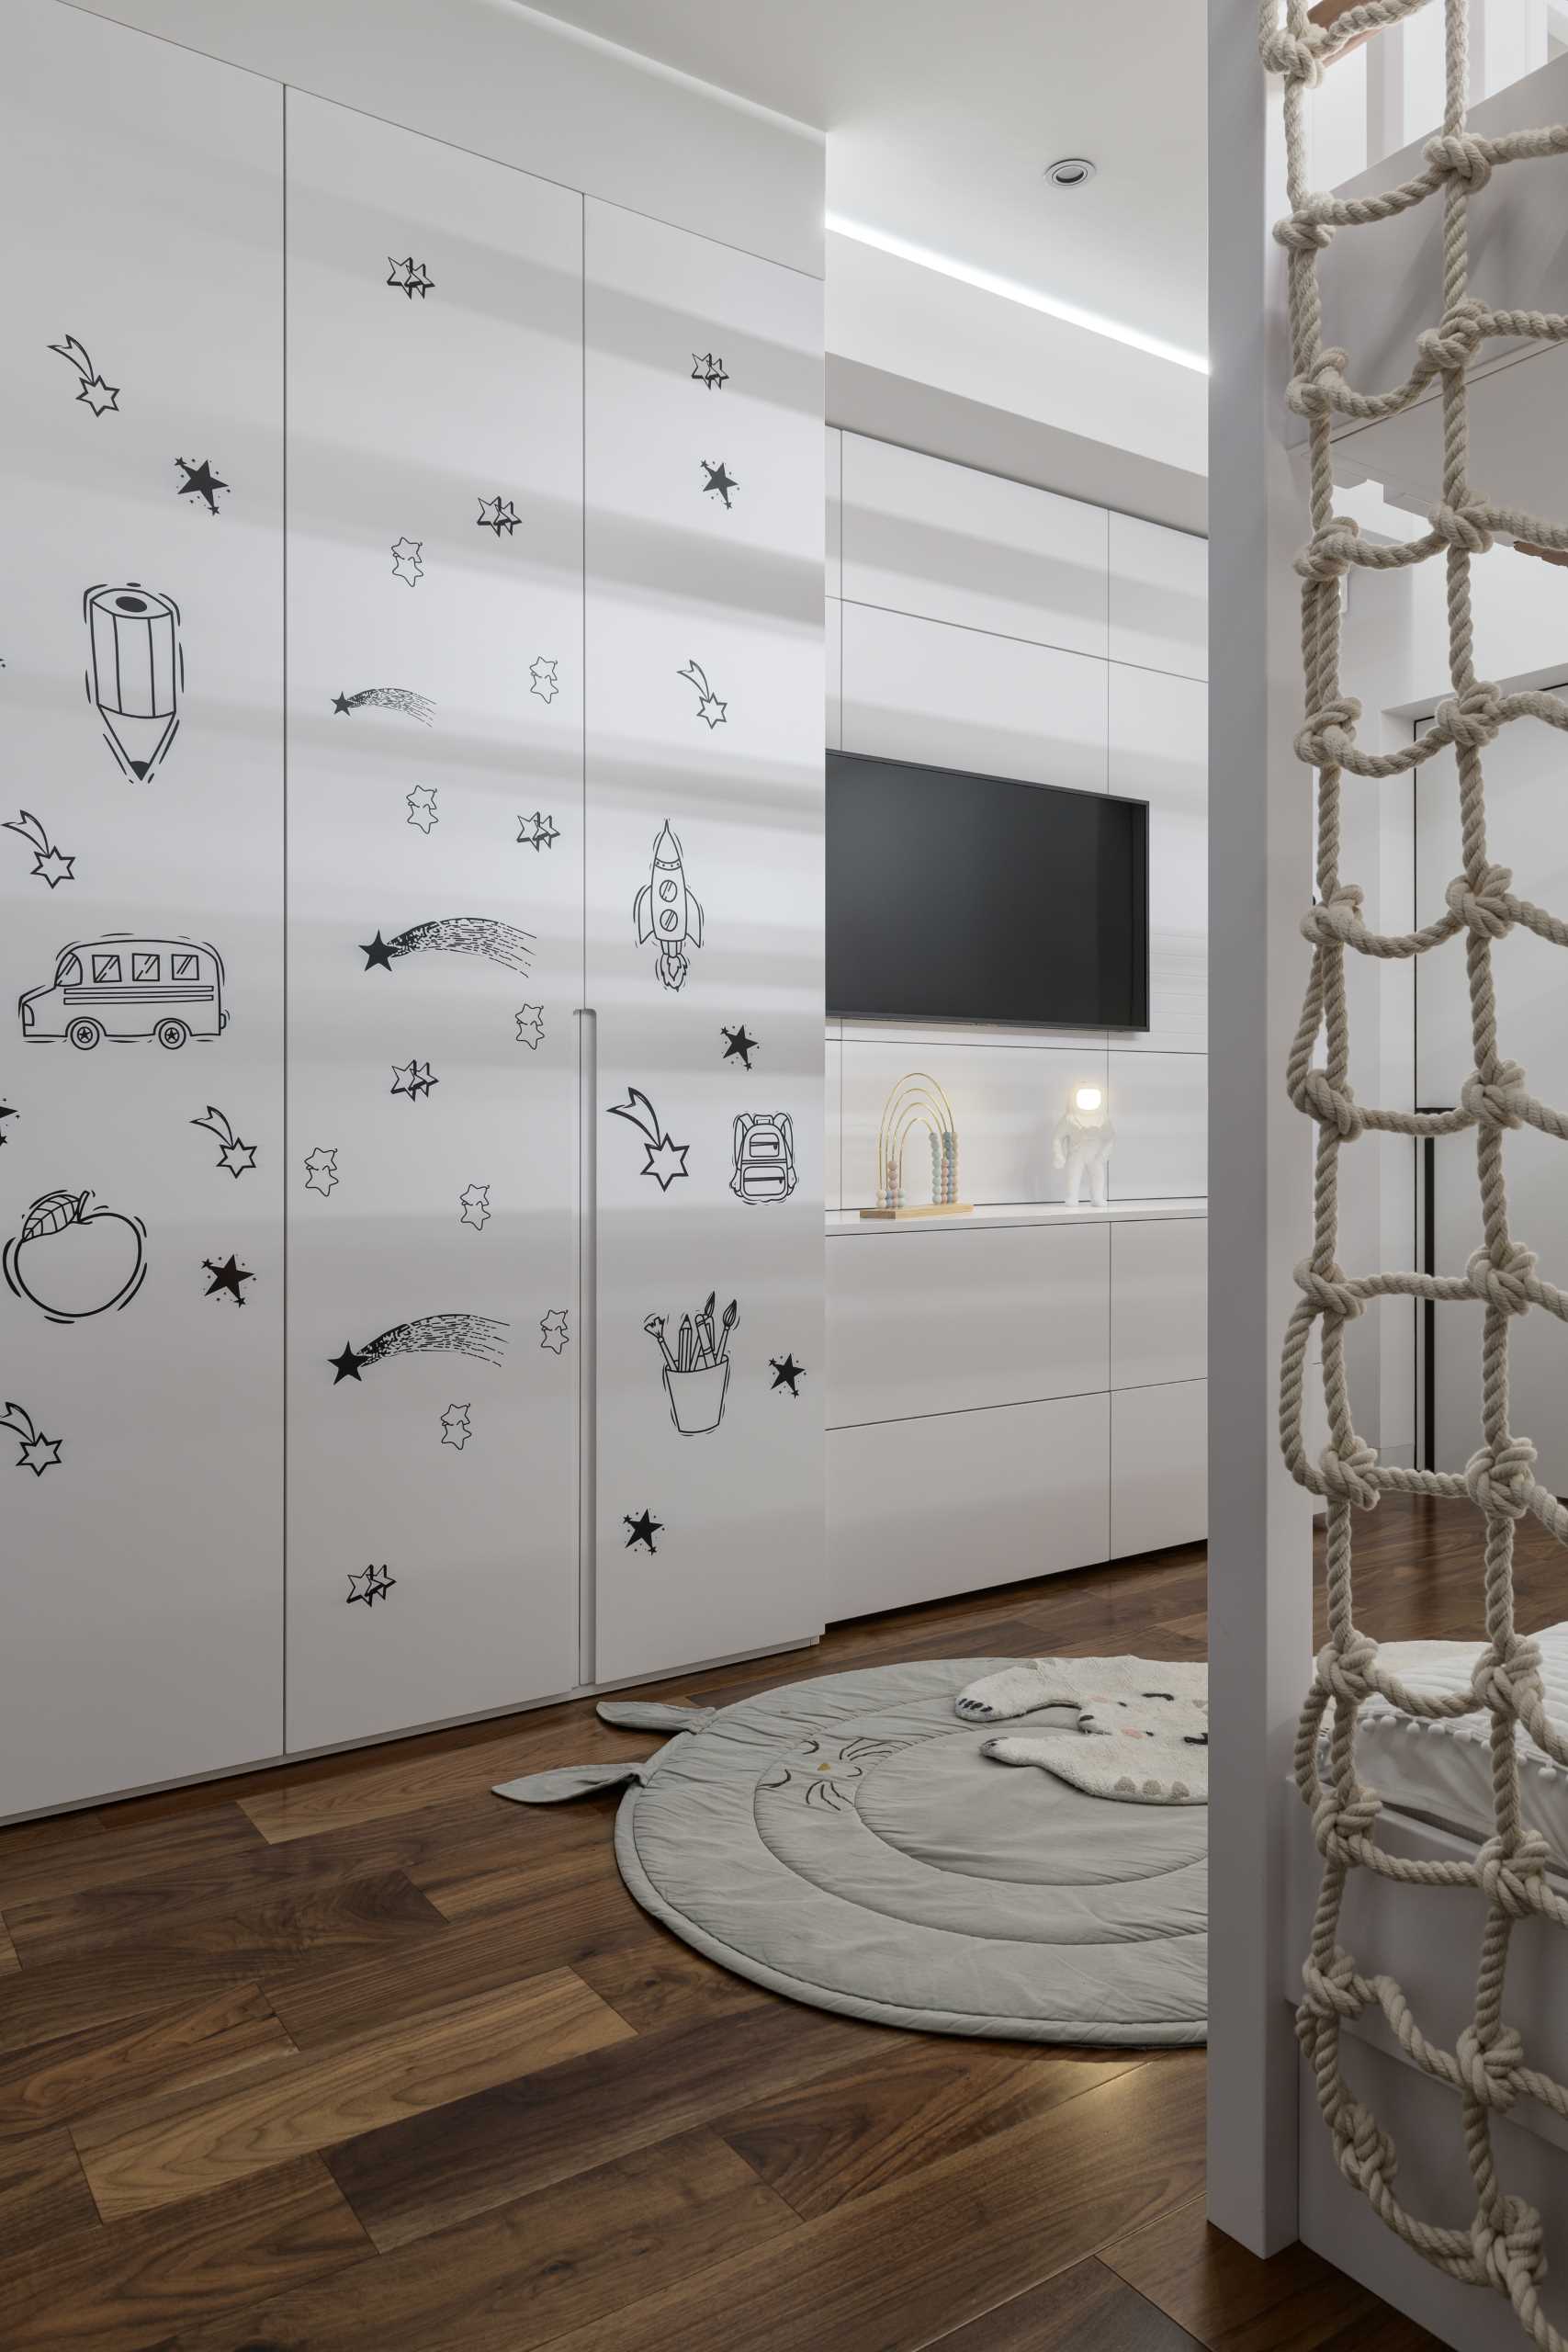 Simple line drawings add a fun decorative element to this modern kids bedroom.